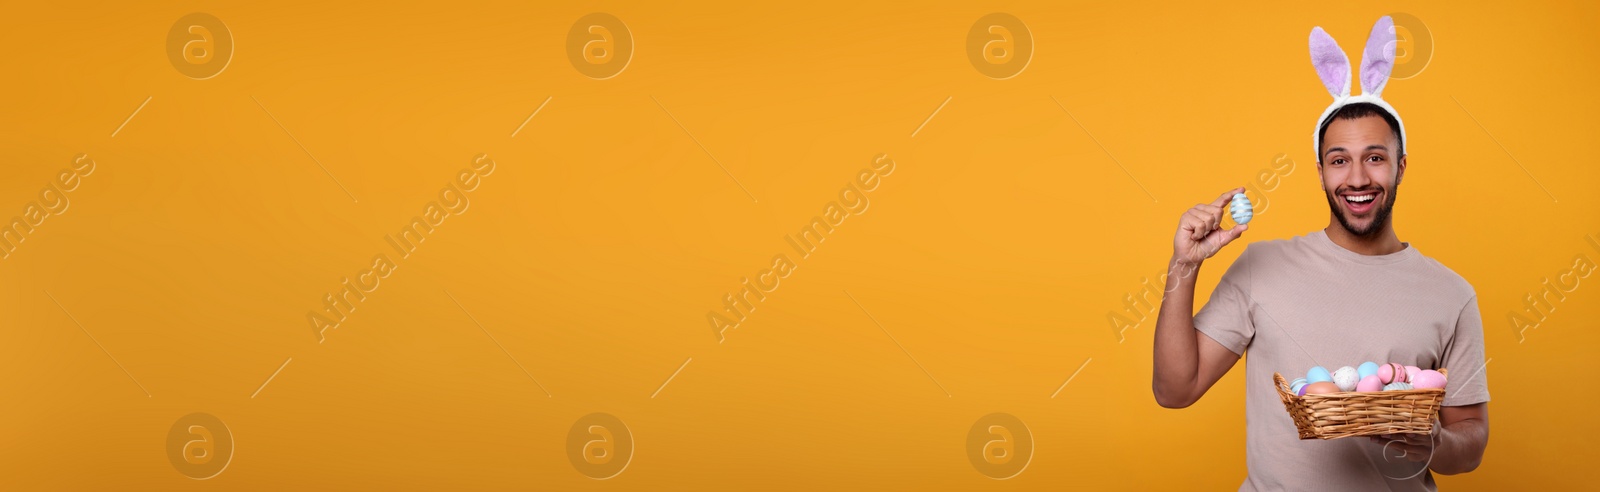 Image of Man with bunny ears holding basket full of Easter eggs on orange background, space for text. Banner design